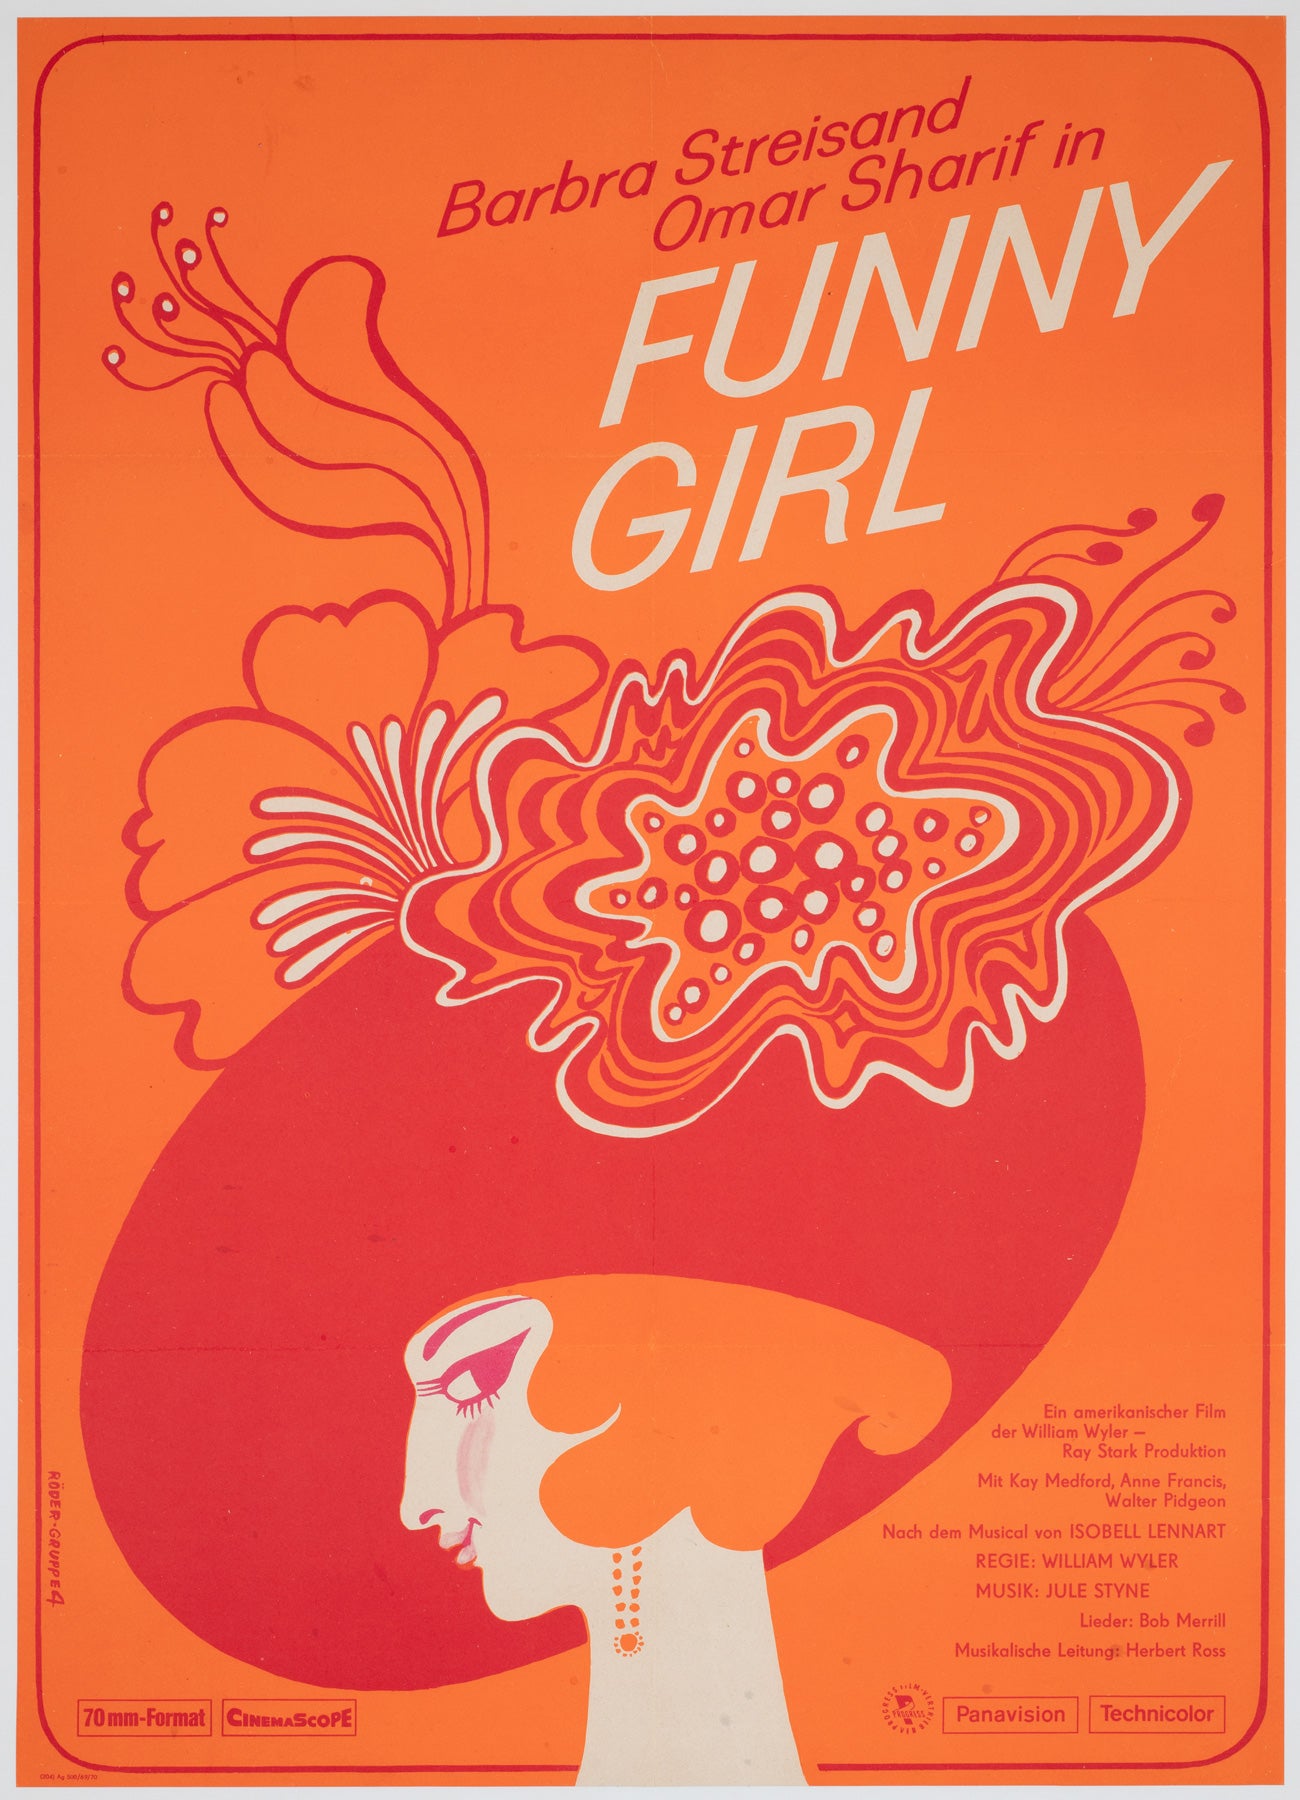 Funny Girl 1970 East German A1 Film Movie Poster, Roeder